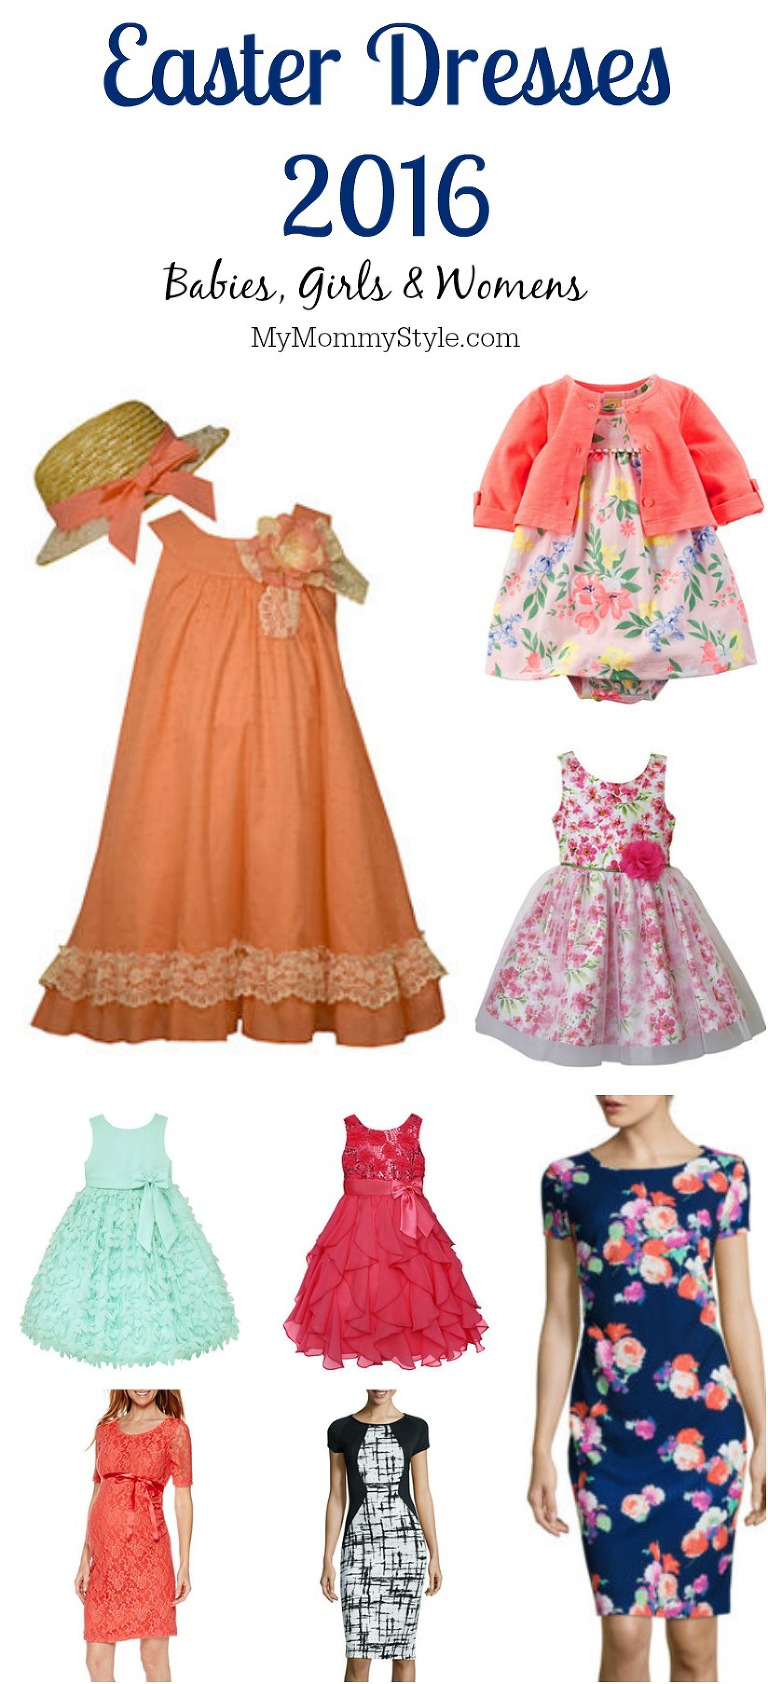 Easter dresses, Easter Dress, Girls dresses, Easter 2016, JCPenny, Mymommystyle, fashion, girls fashion, baby easter dresses